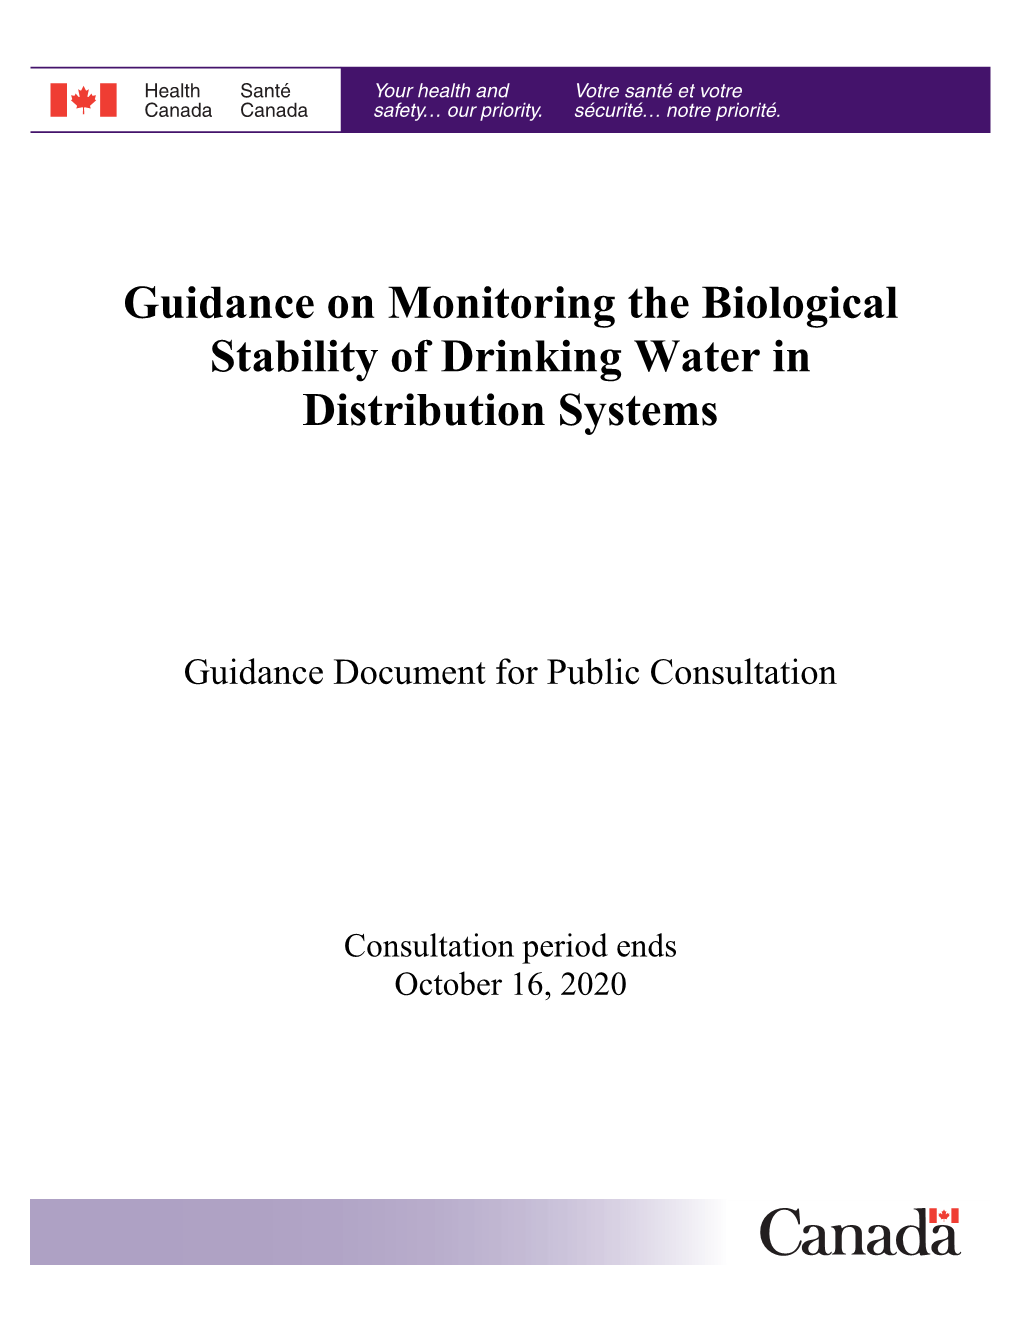 Guidance on Monitoring the Biological Stability of Drinking Water in Distribution Systems